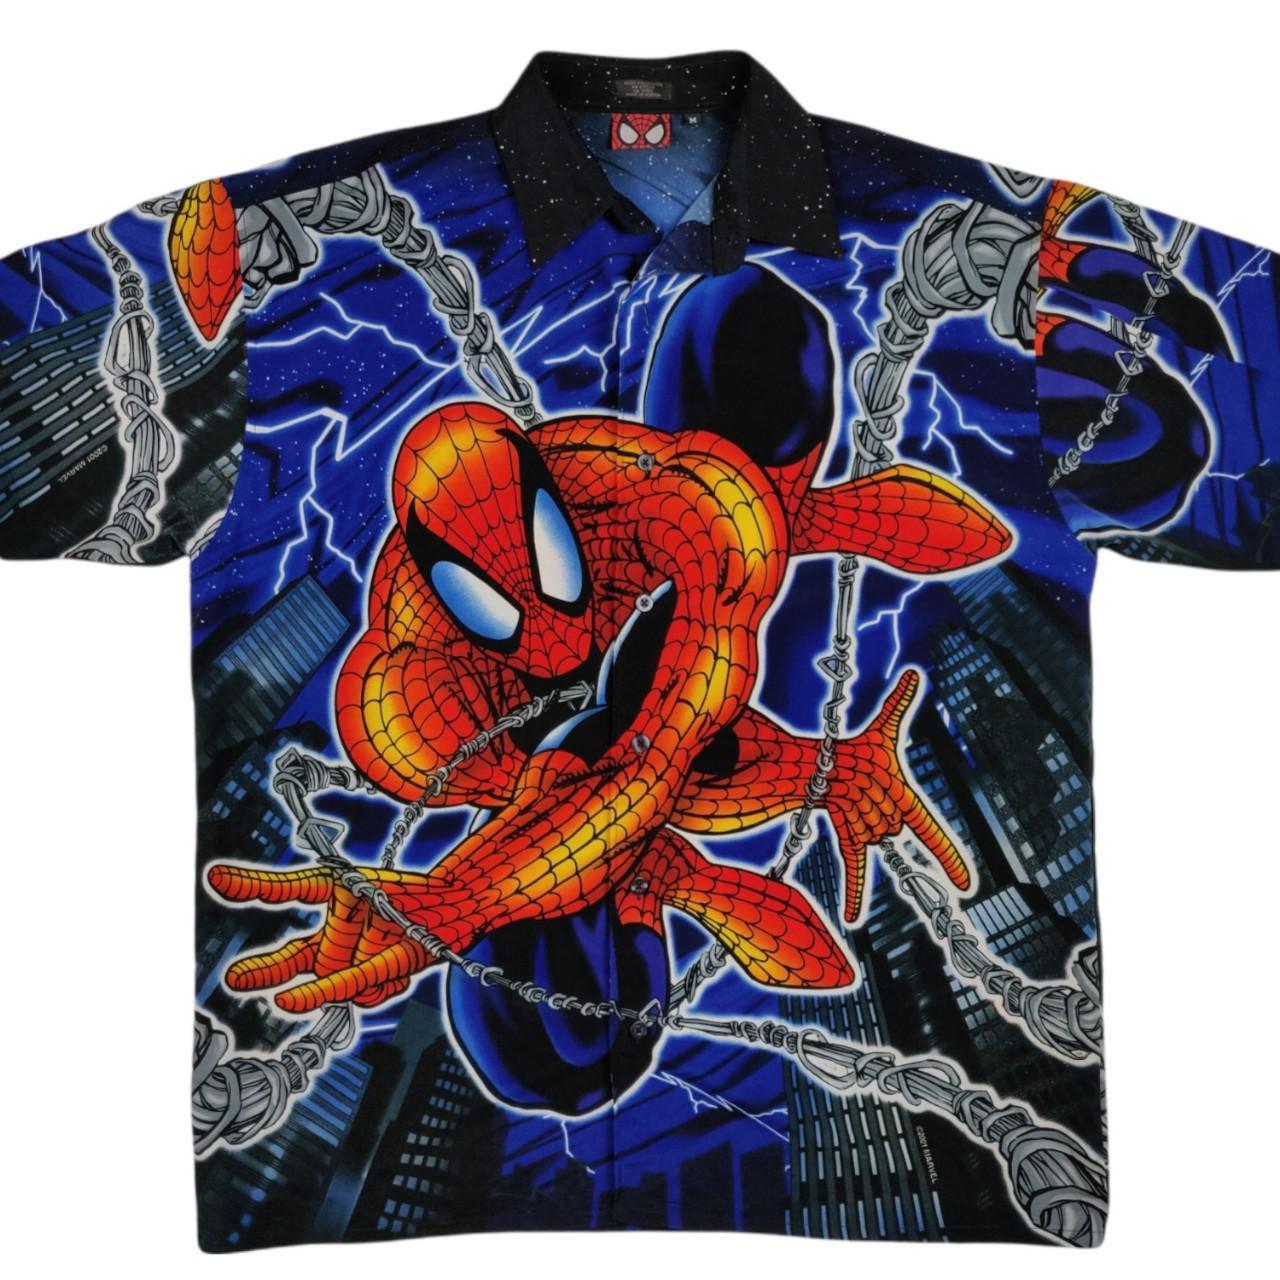 Product Image 1 - 2001 Spider-Man Button Up Shirt
Fits